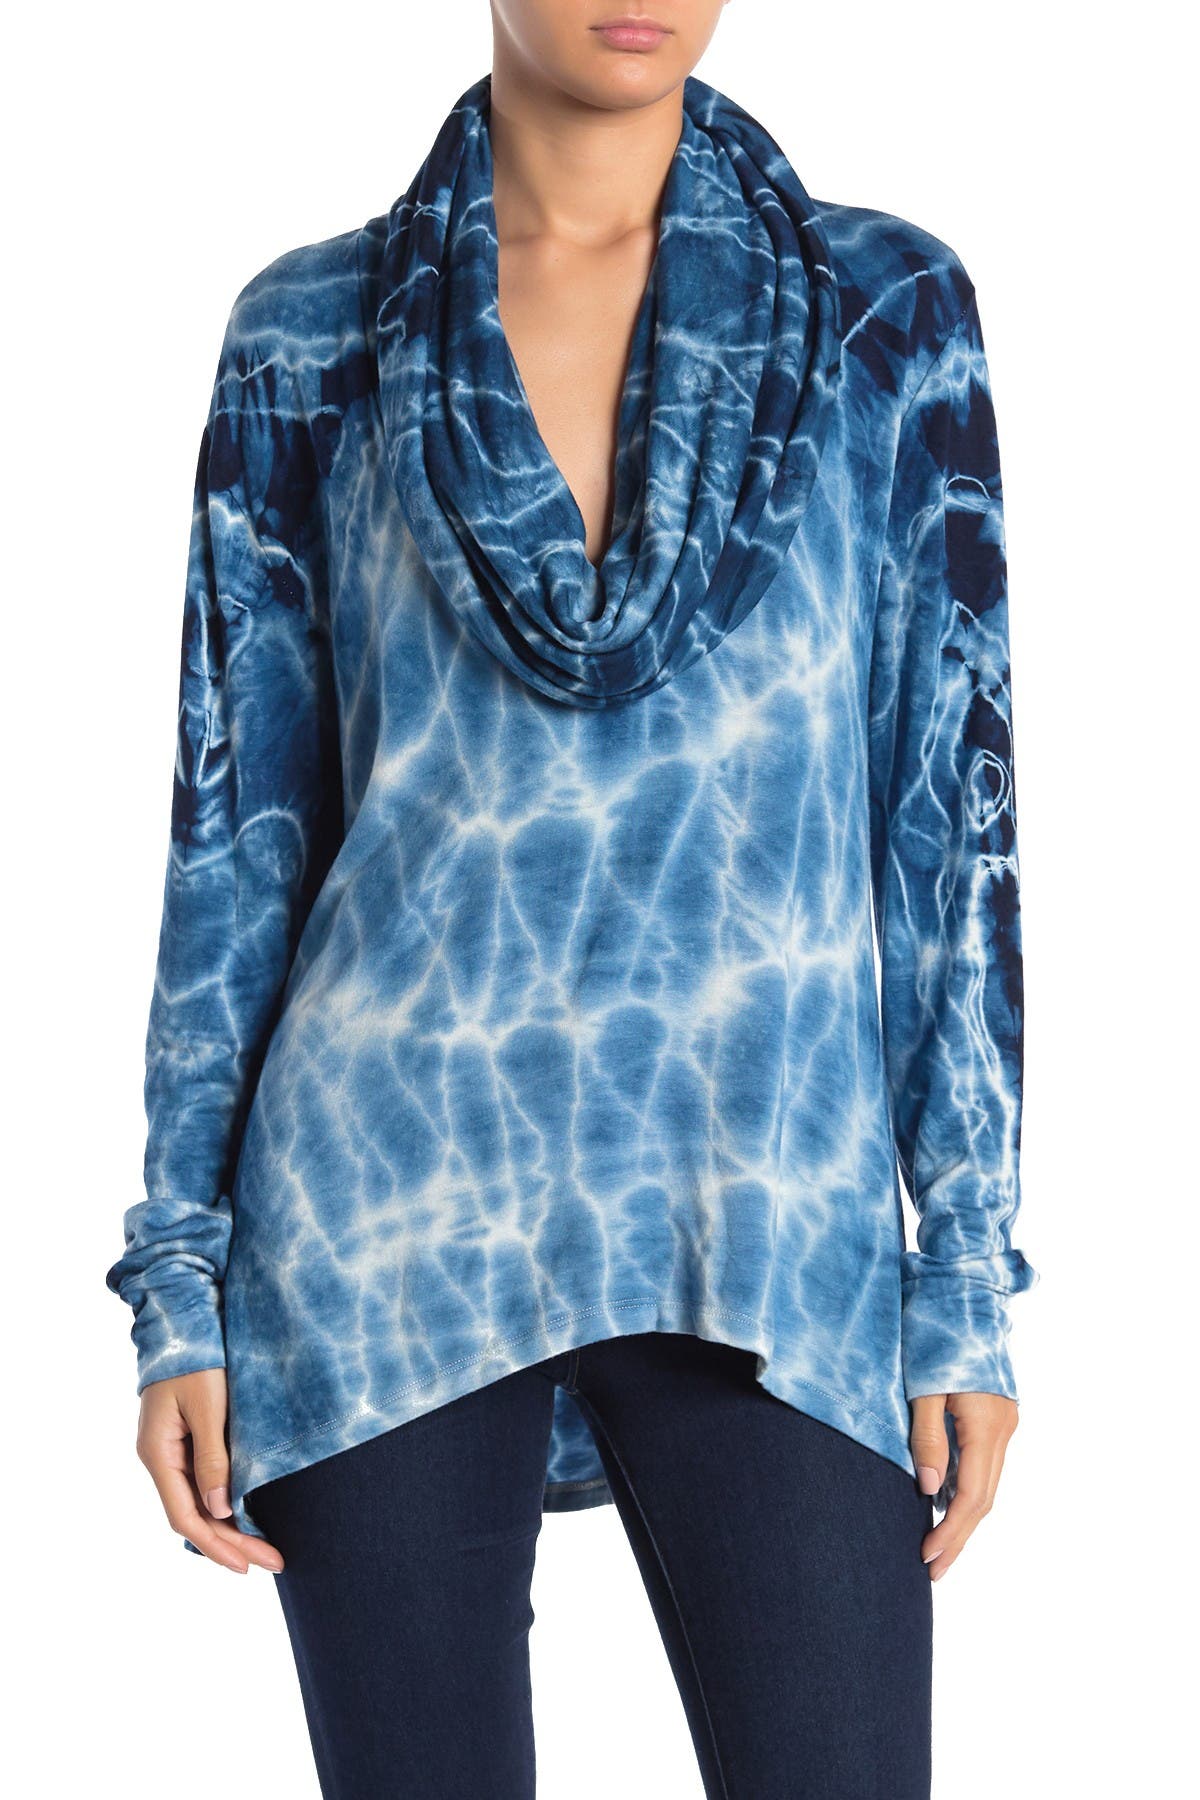 Go Couture Brushed Cowl Neck Tunic In Blue Swirl Wash